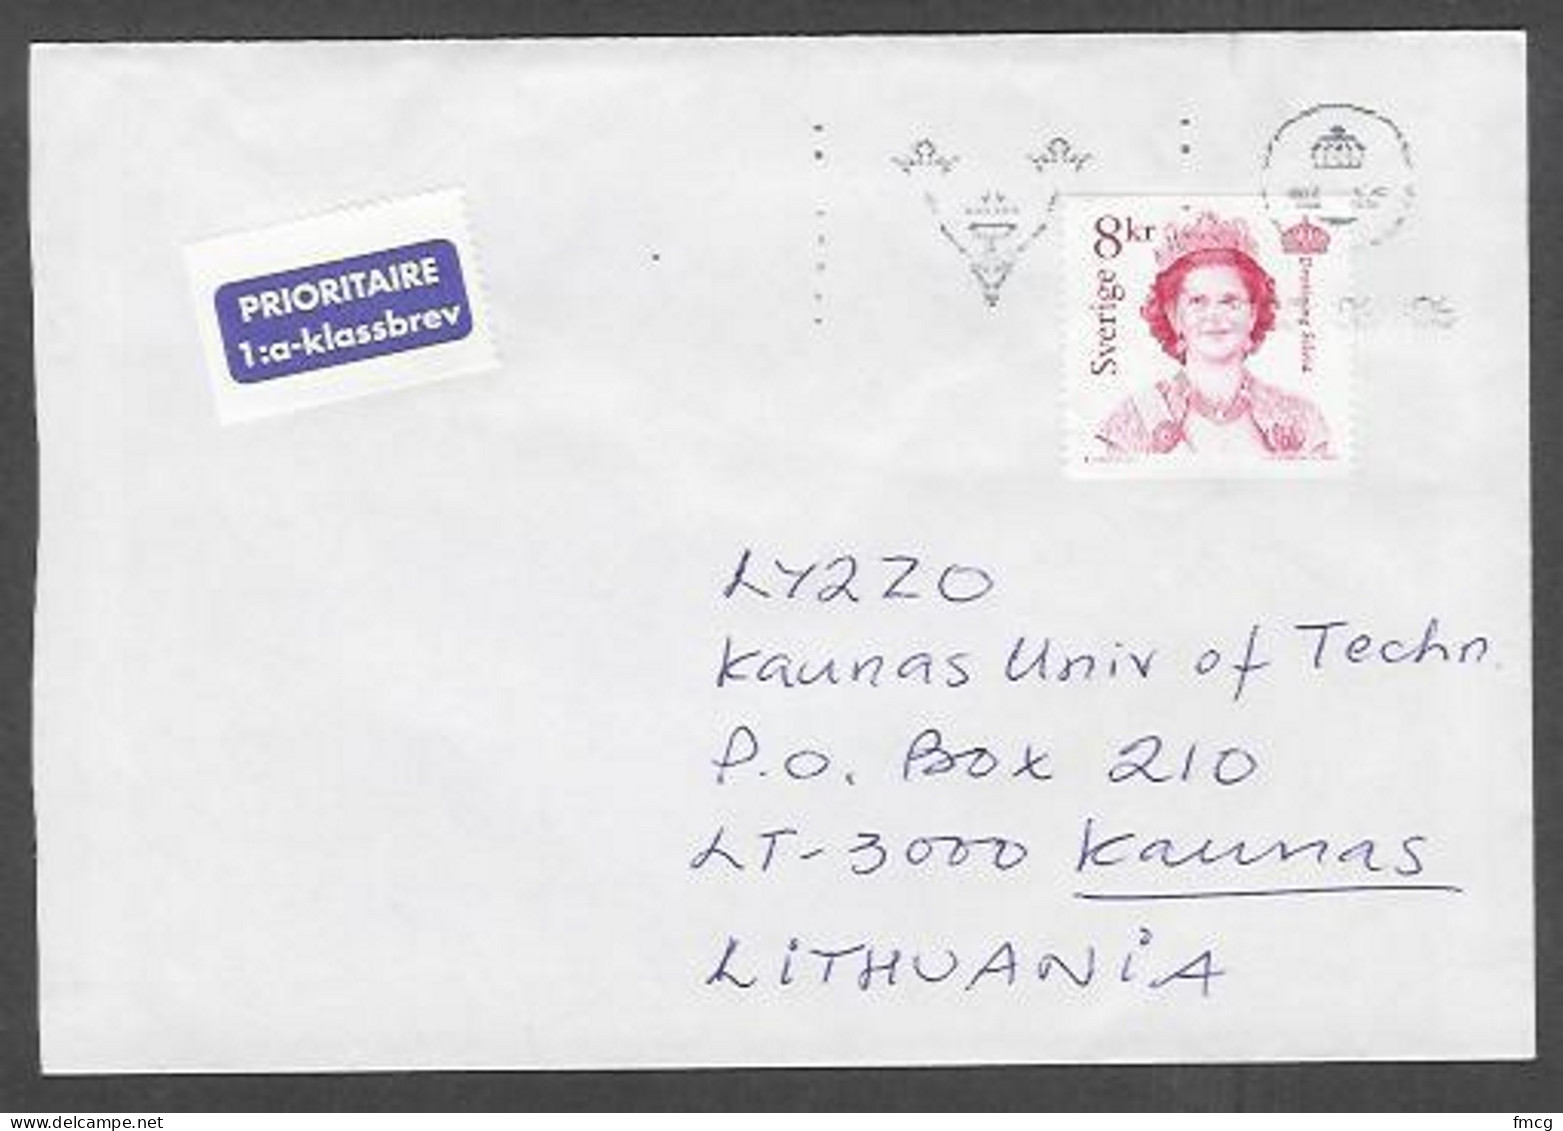 8 Kr Queen Sivia On Cover To Kaunas Lithuania - Covers & Documents